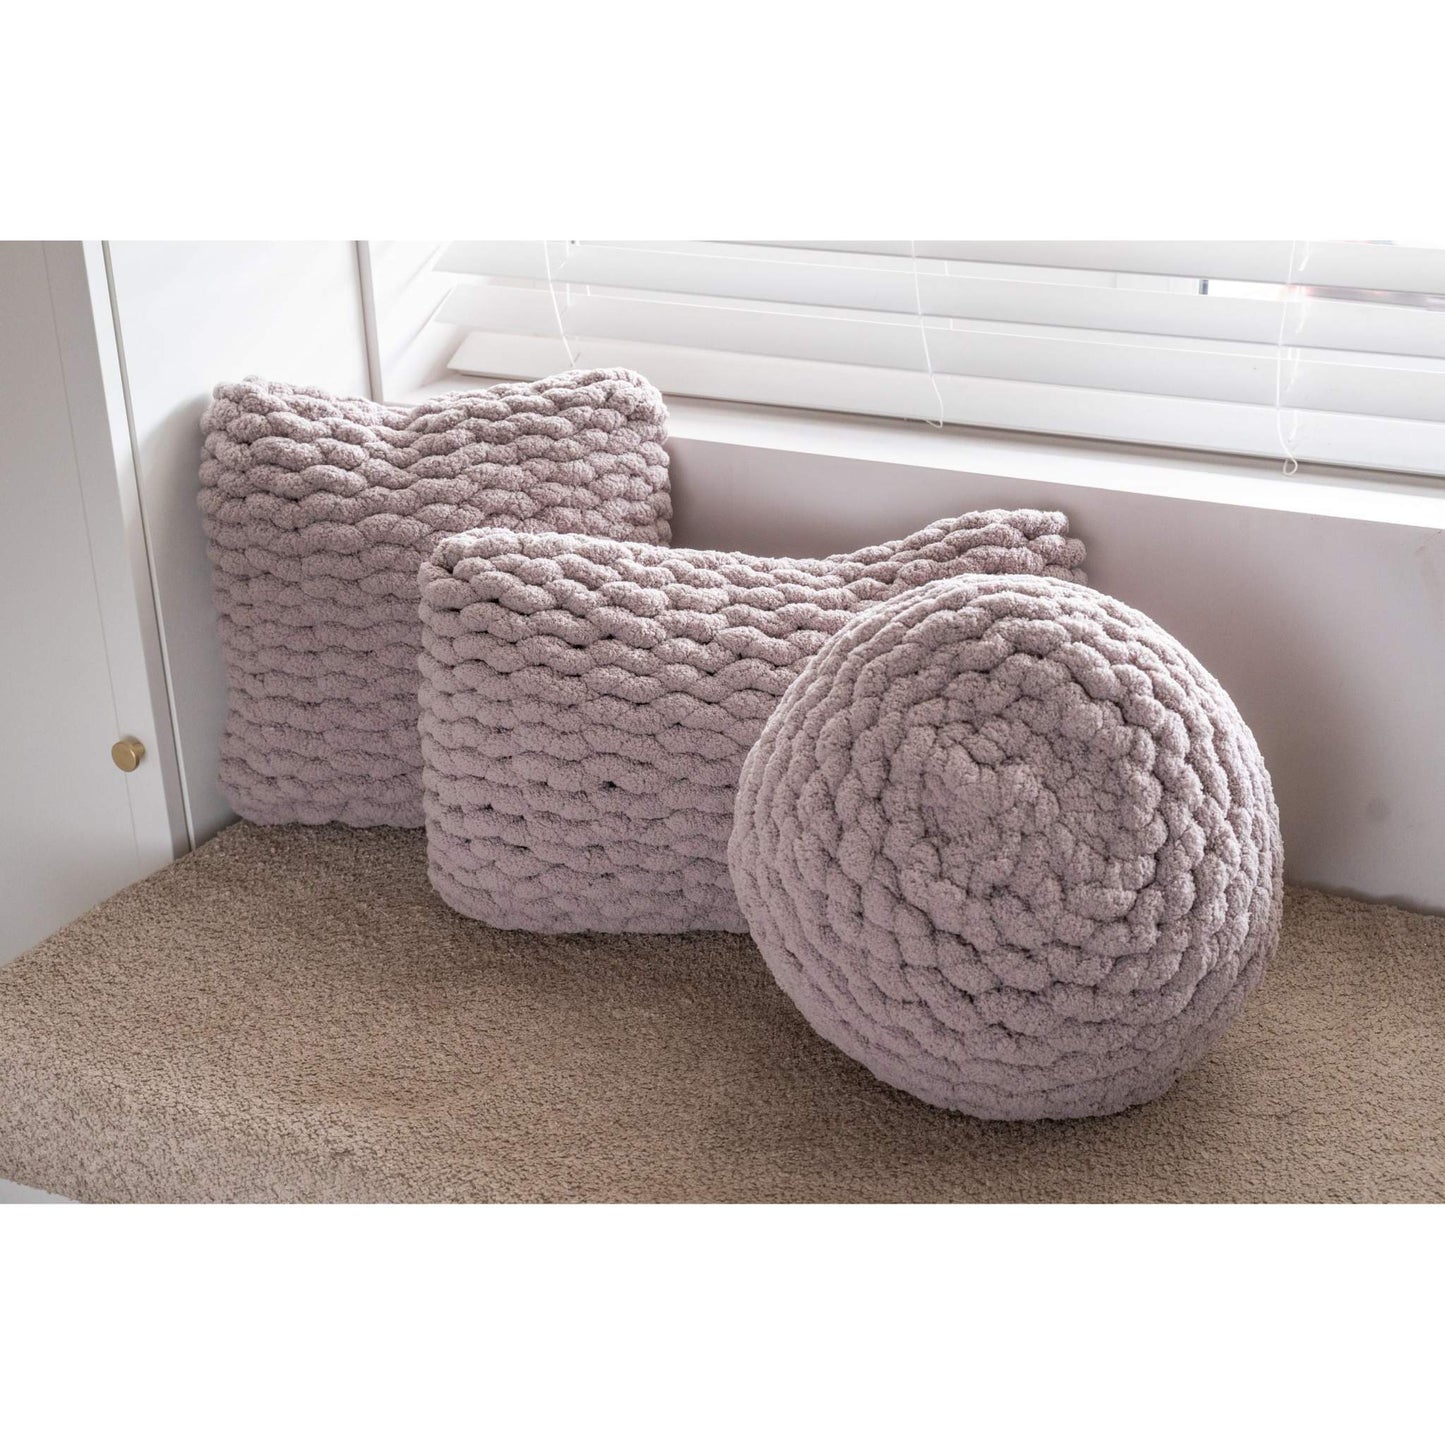 trio of hand knit cushions in grey